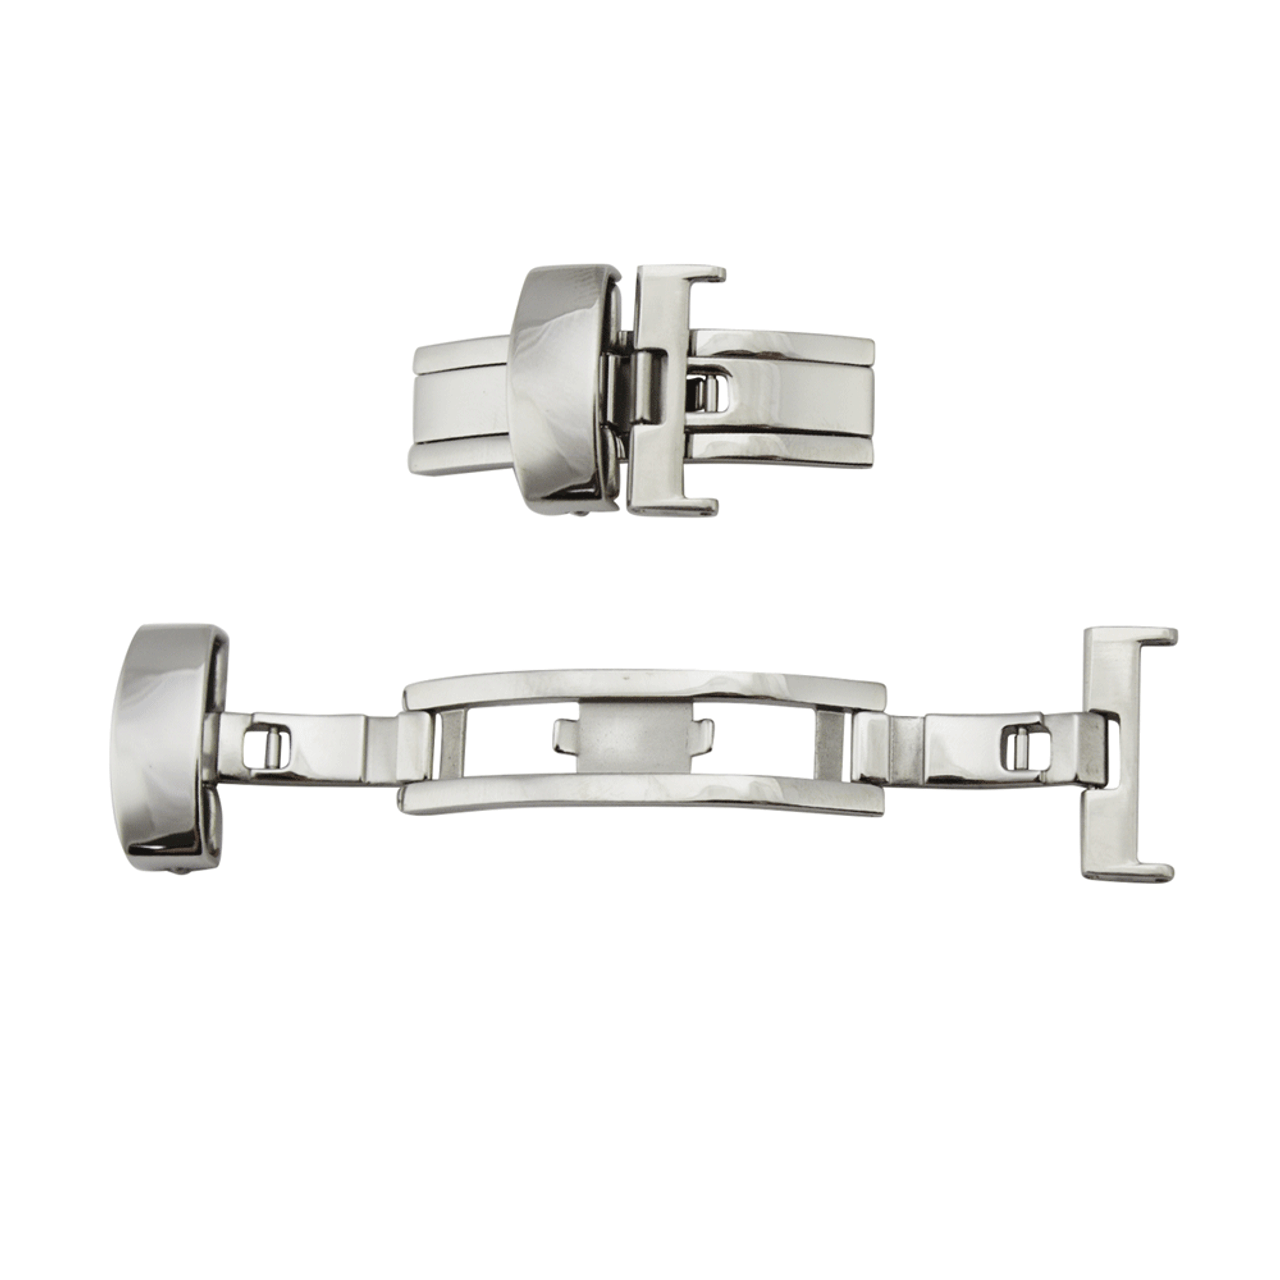 15mm Folding Deployment Clasp Buckle Stainless Steel Watch Band Extender  4mm Install Width, Silver Tone 